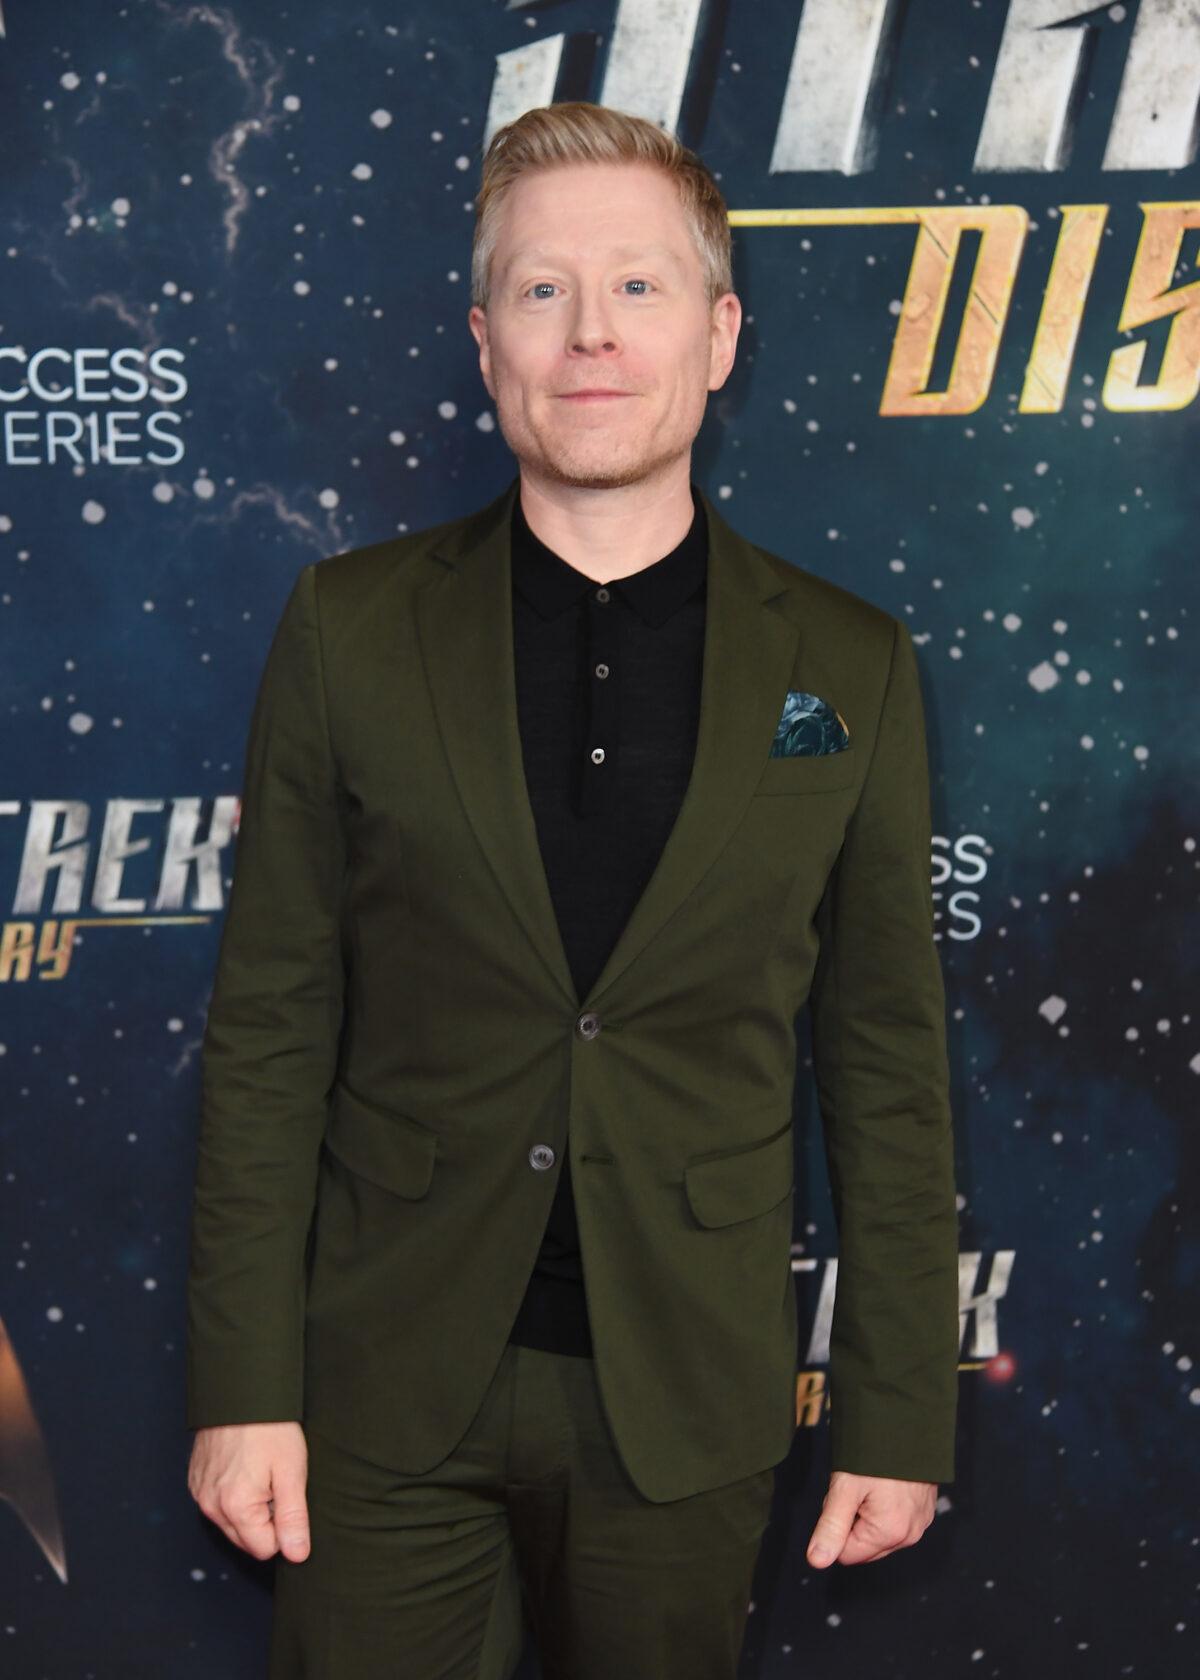 Actor Anthony Rapp attends the "Star Trek: Discovery" Season 2 Premiere at the Conrad New York in New York City on Jan. 17, 2019. (Photo by Nicholas Hunt/Getty Images)